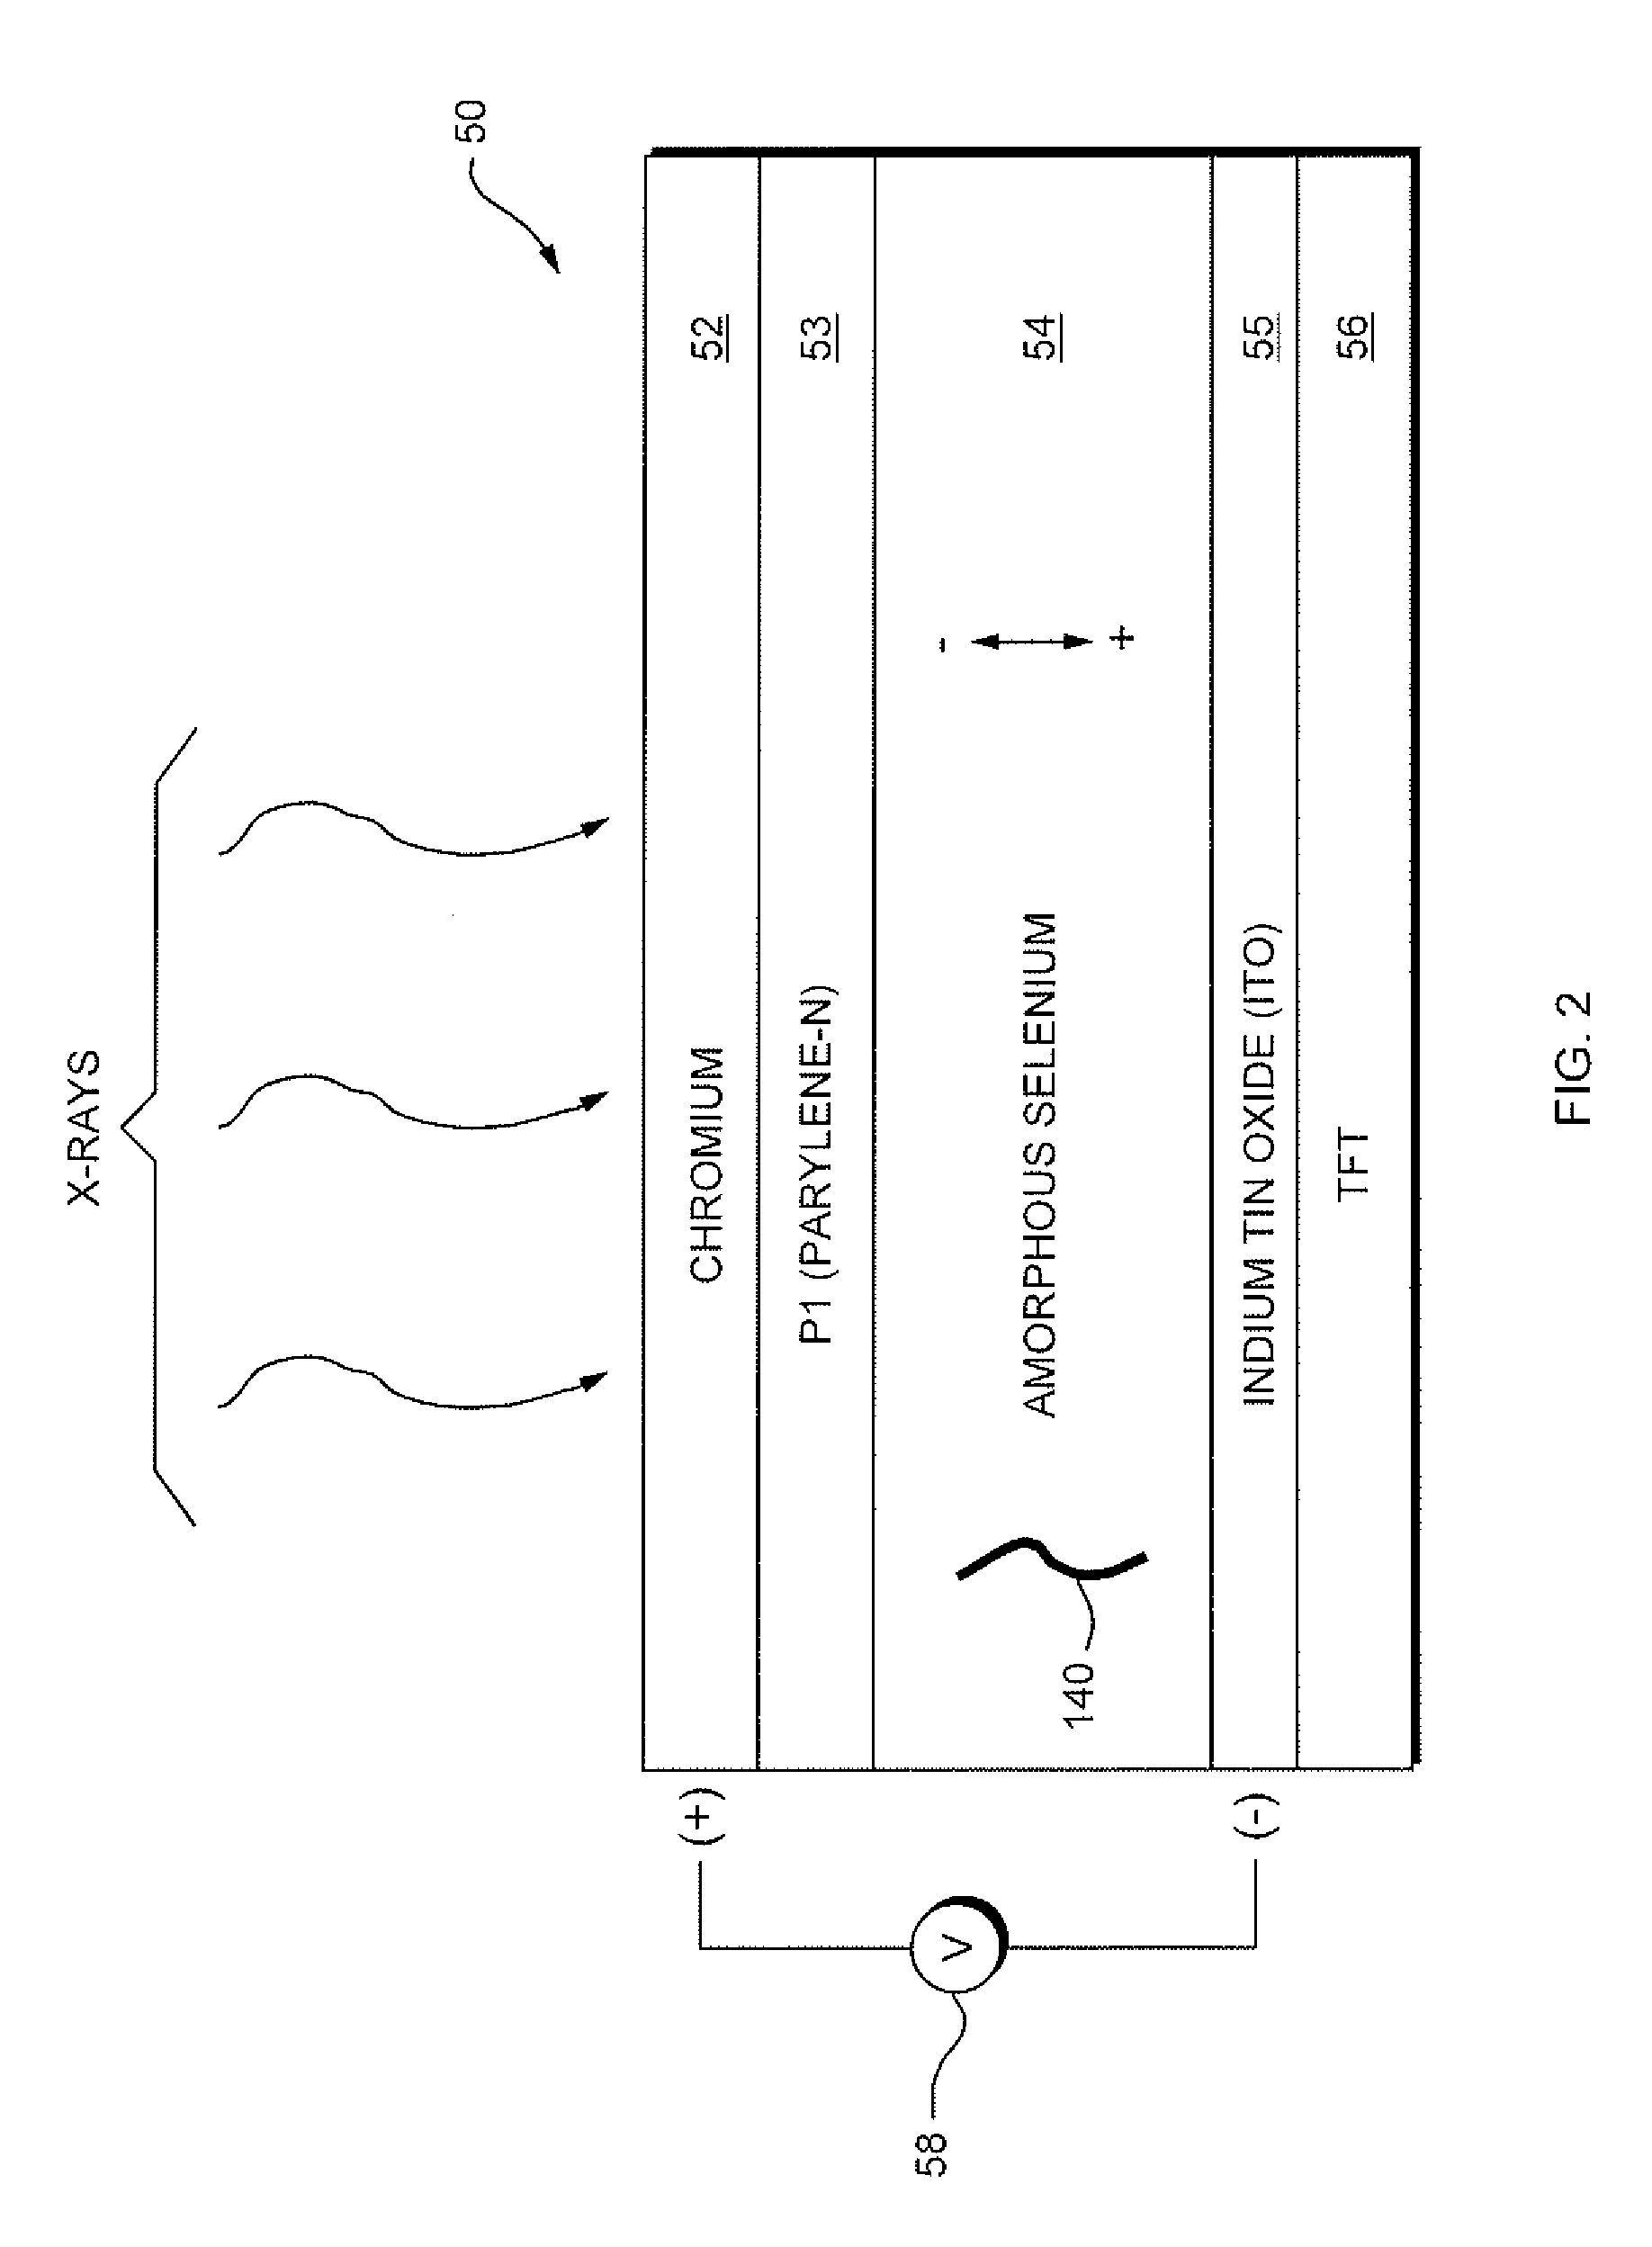 Method for Characterizing X-Ray Detector Materials Using a Raman Microscope